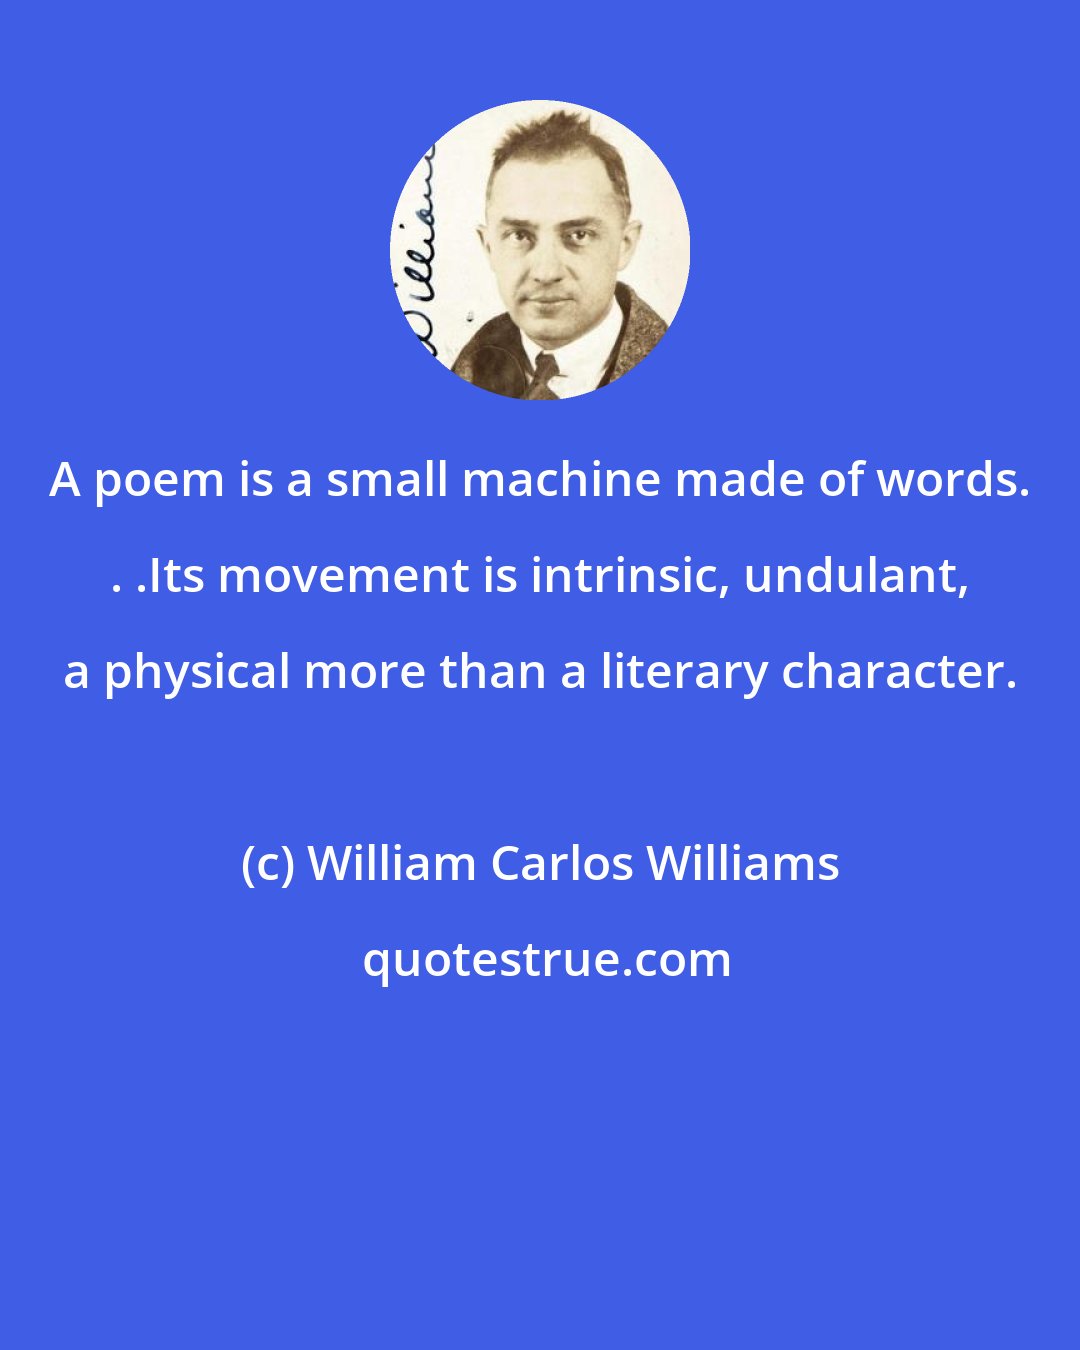 William Carlos Williams: A poem is a small machine made of words. . .Its movement is intrinsic, undulant, a physical more than a literary character.